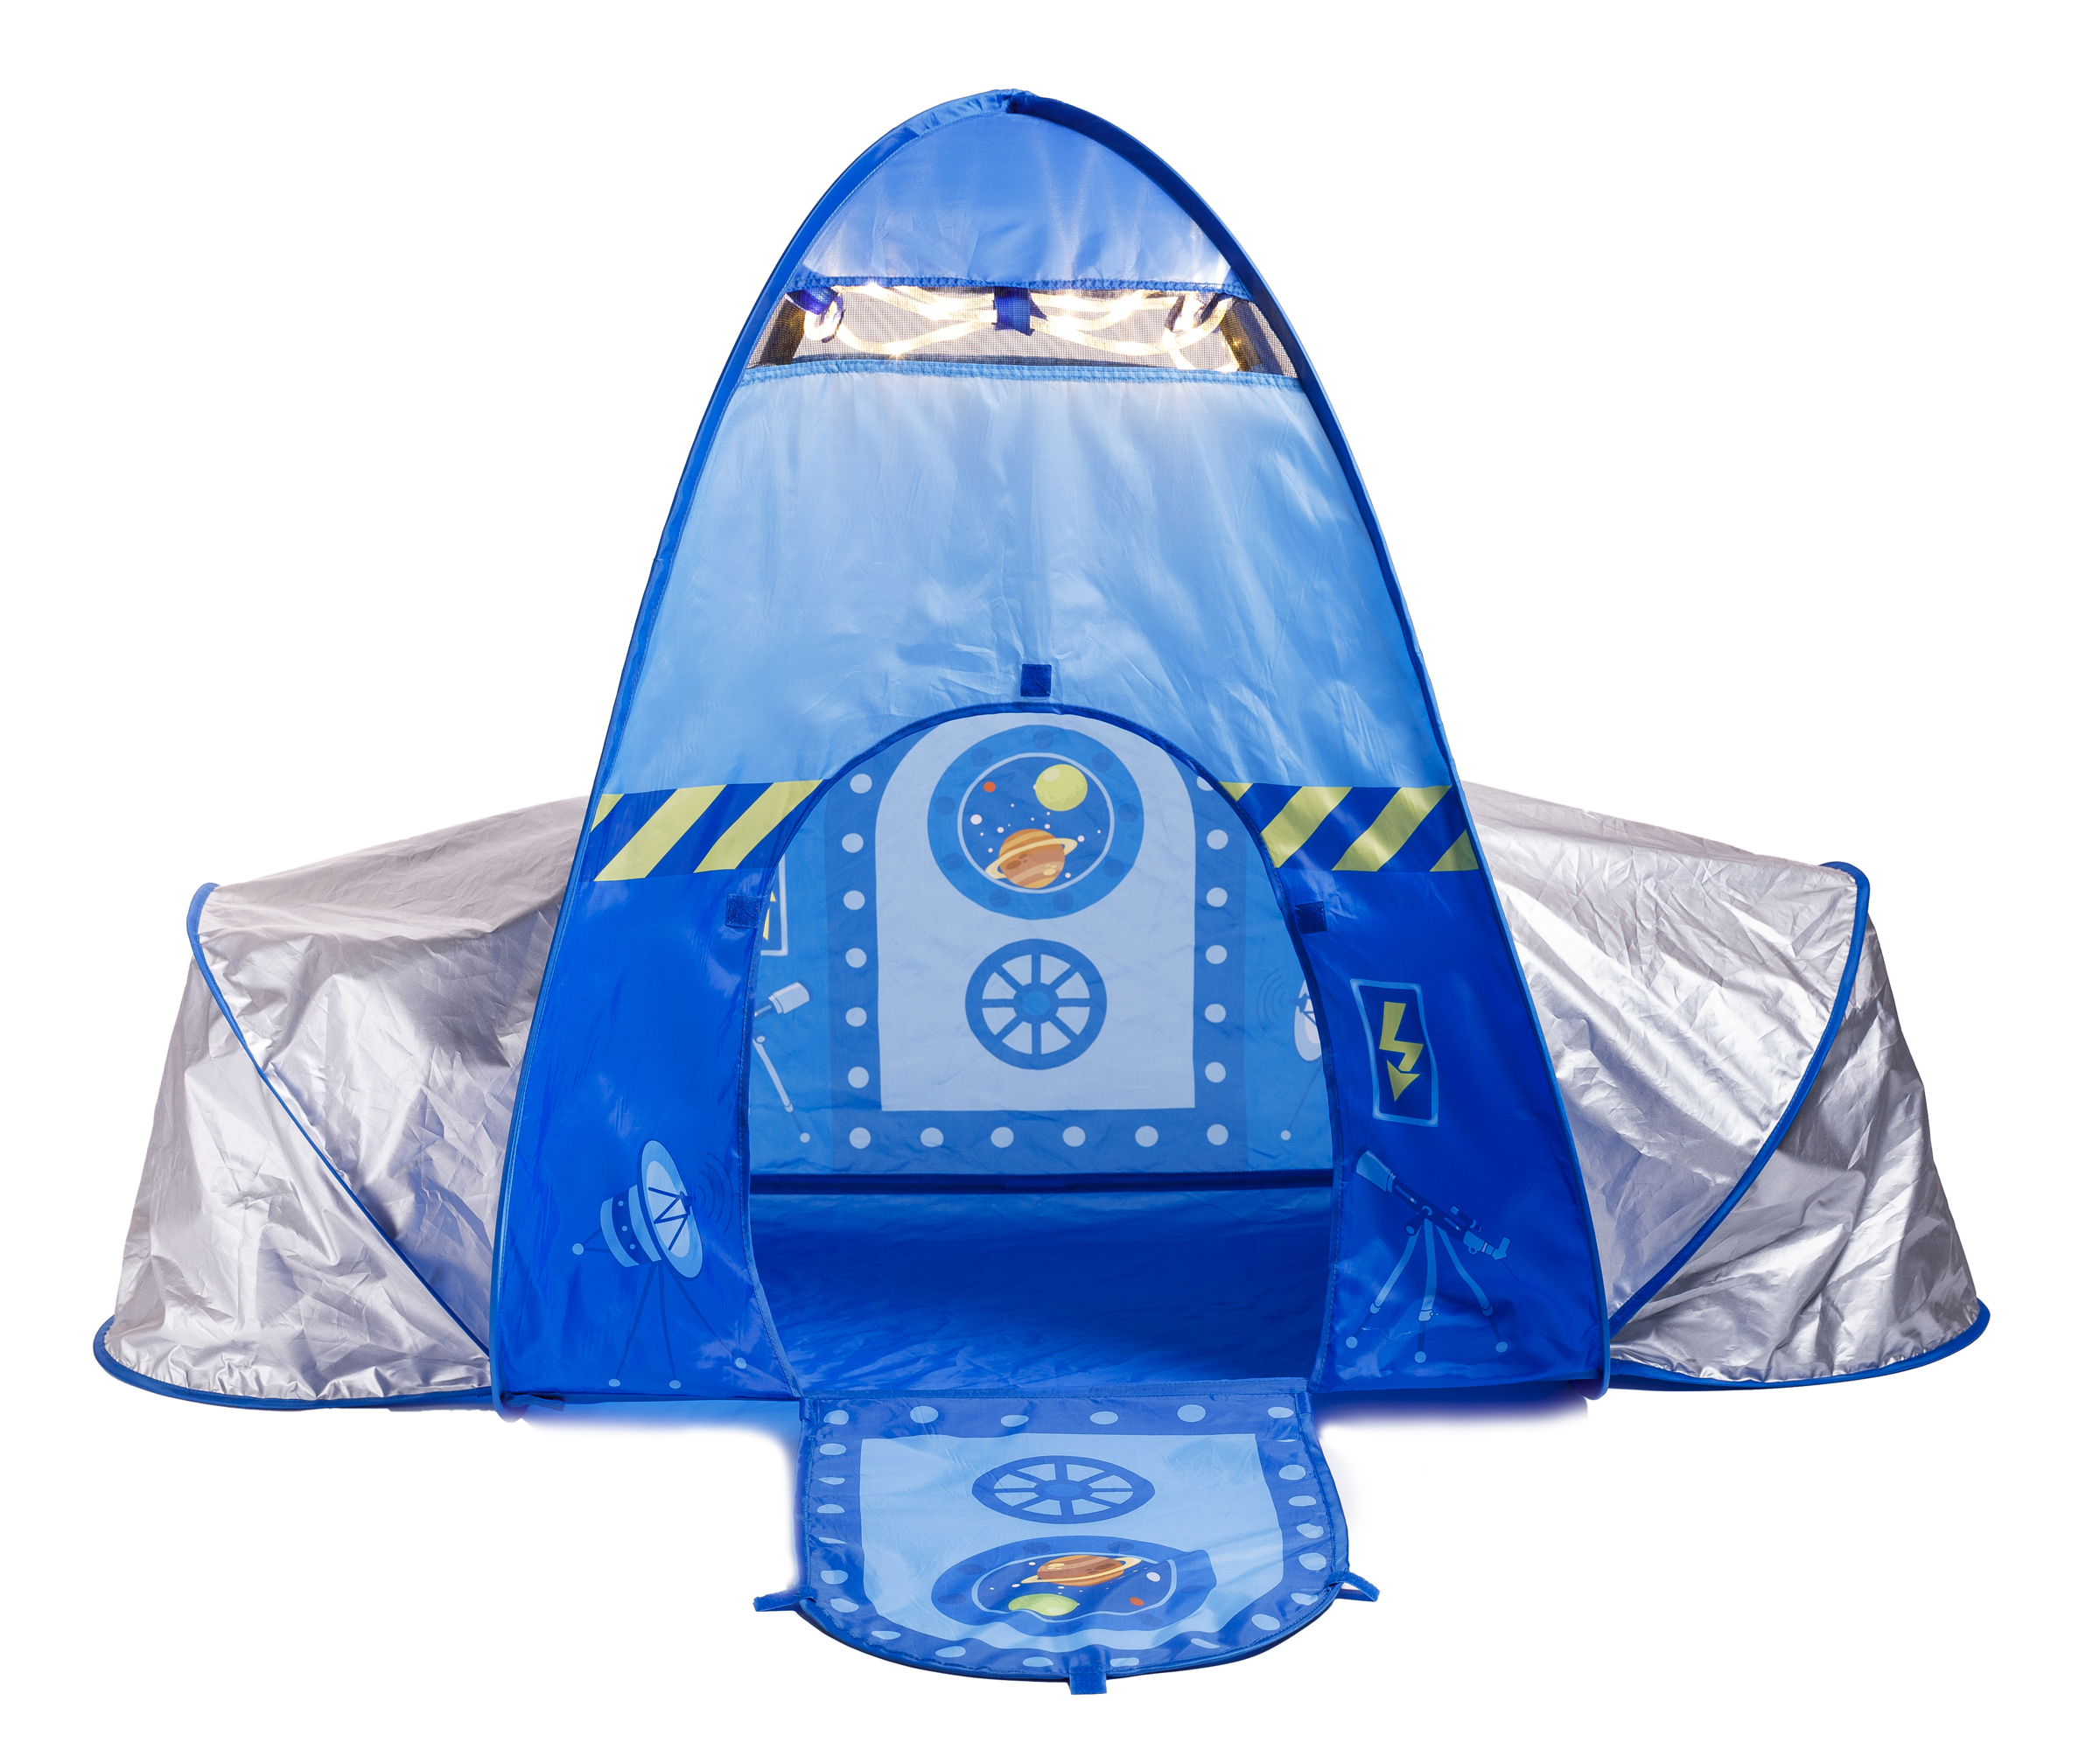 Fun2Give Pop-It-Up Rocket Play Tent w/ Lights - image 1 of 2